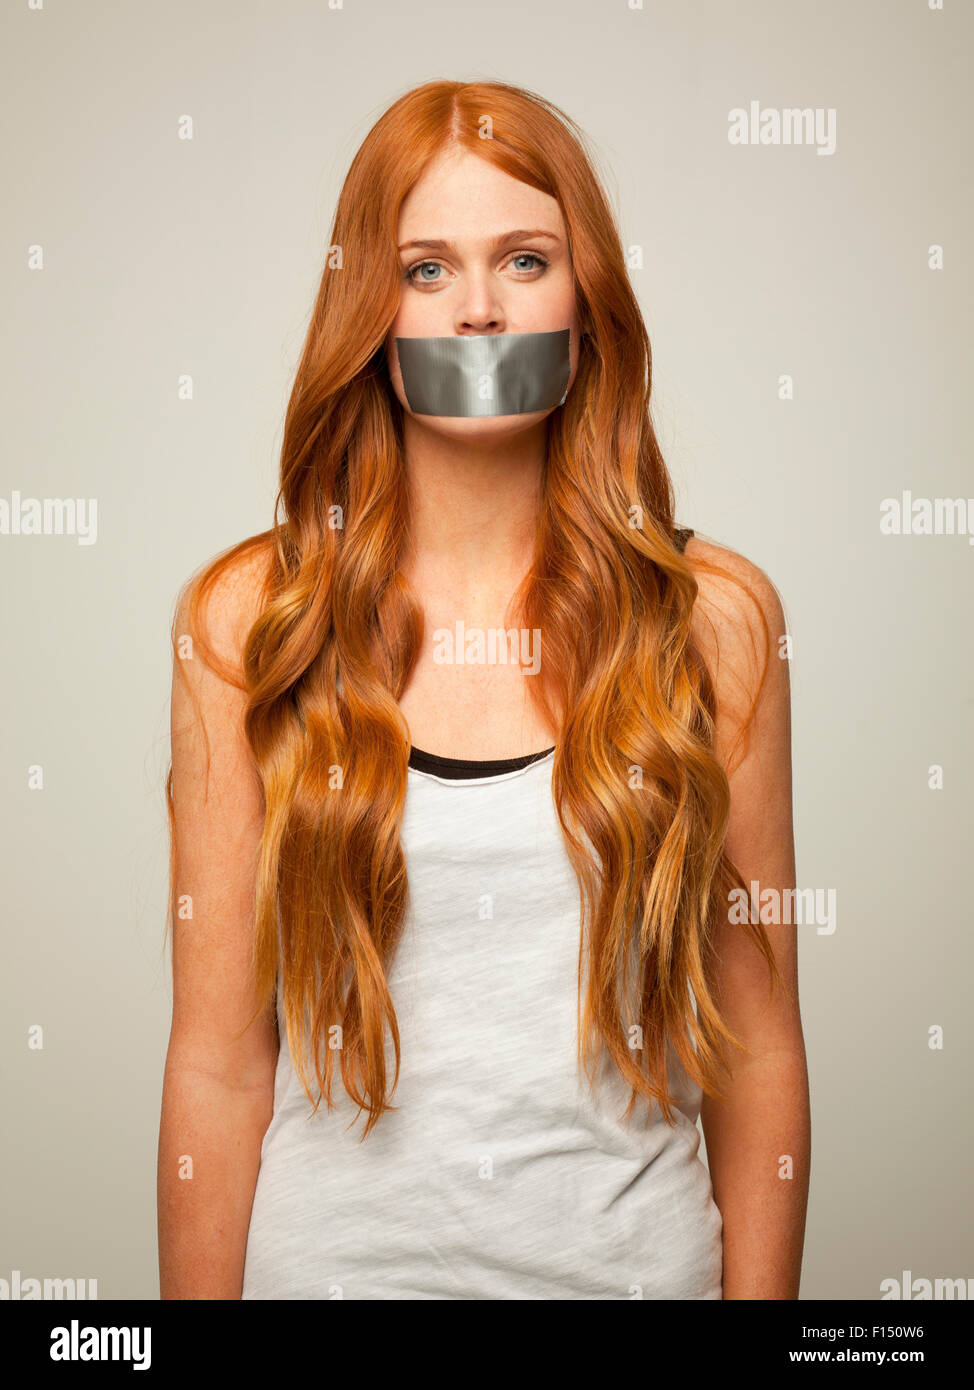 Gagged Woman High Resolution Stock Photography and Images - Alamy